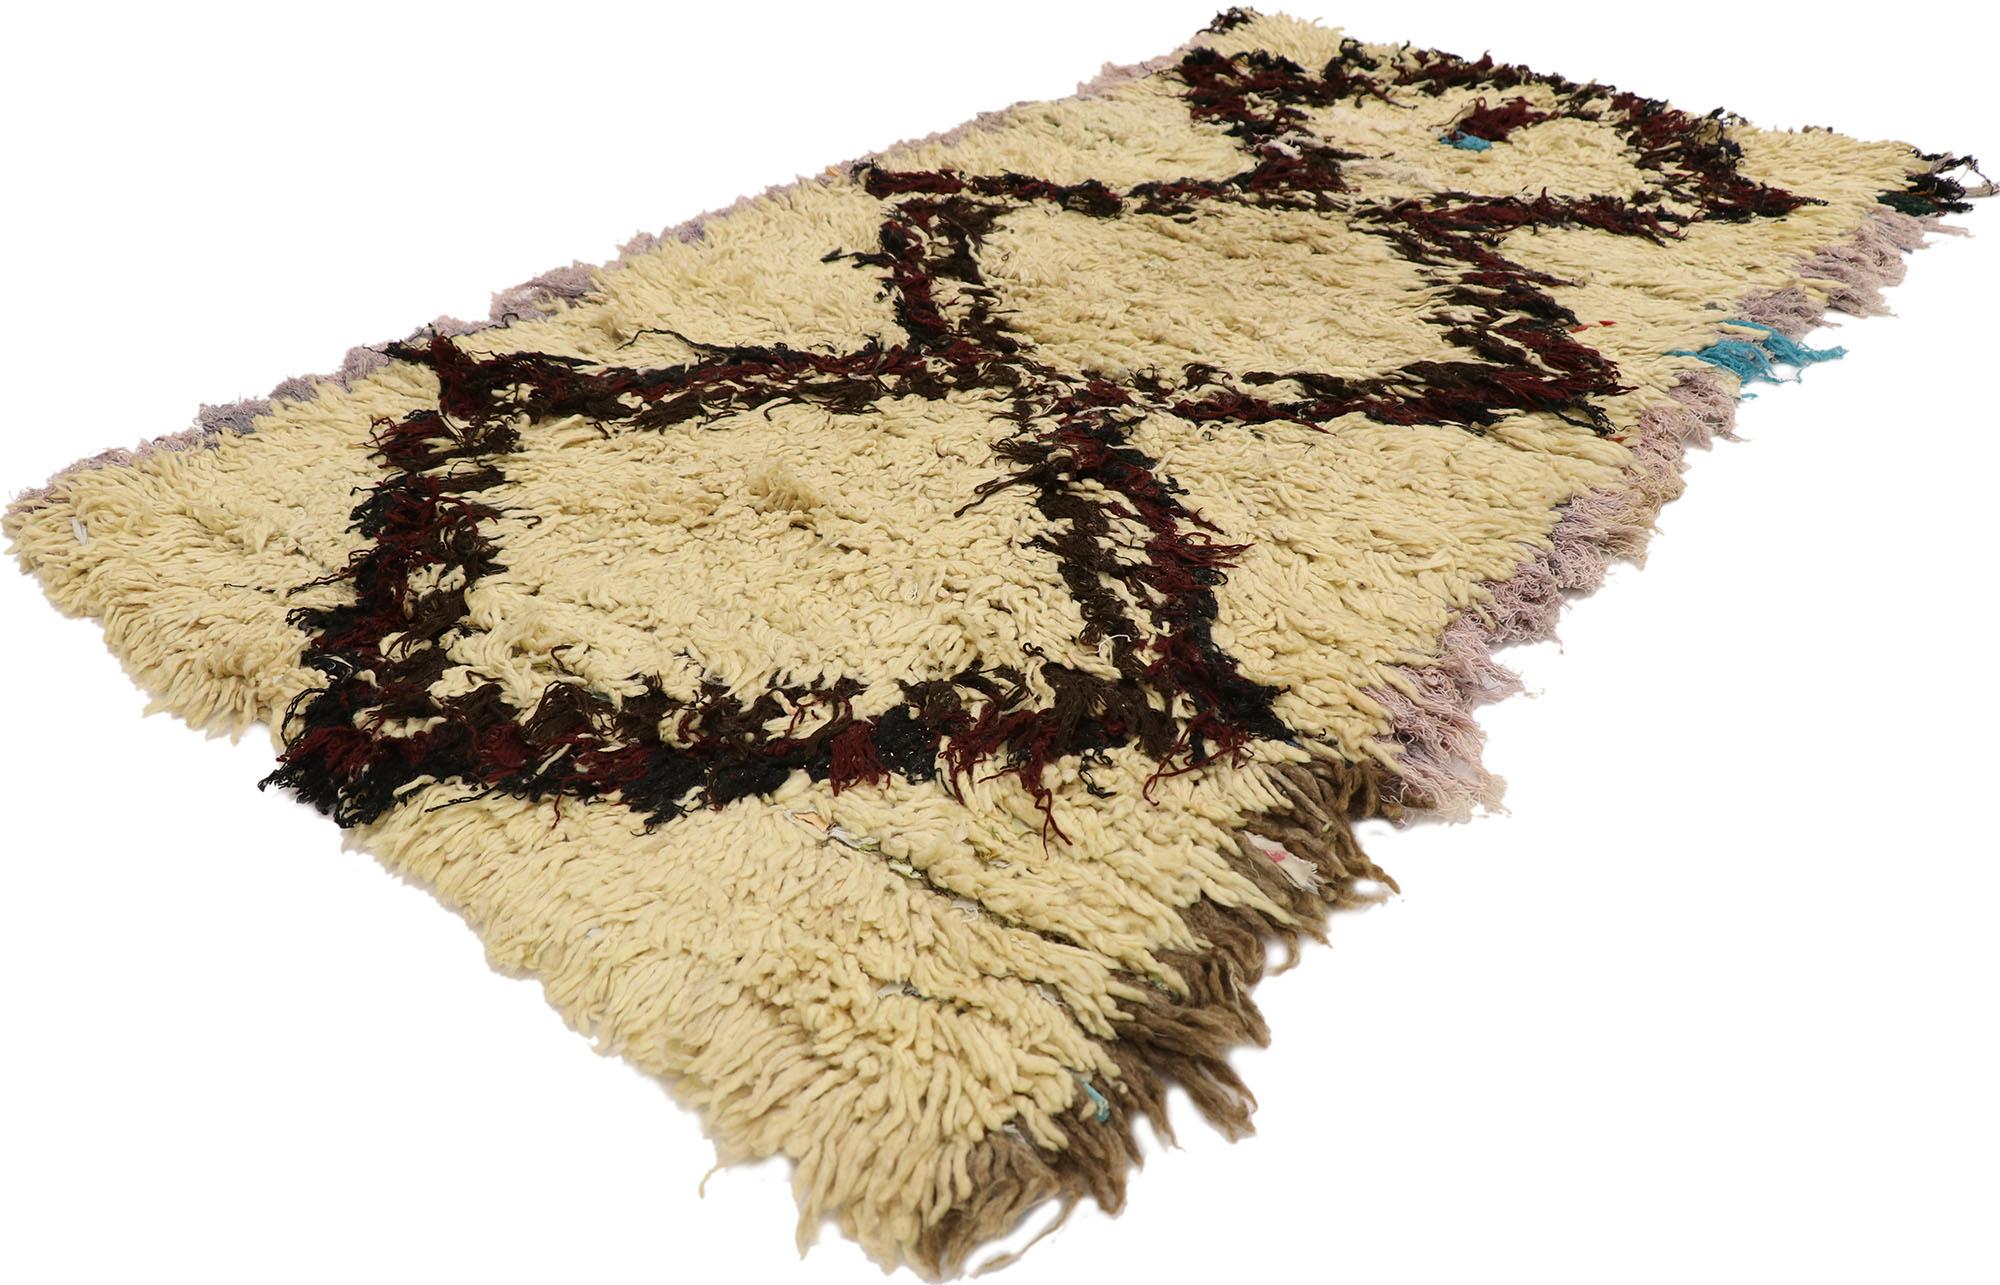 21580 Vintage Boucherouite Moroccan Rug, 02'09 x 04'09.
Nomadic charm meets natural elegance in this hand knotted vintage Boucherouite Moroccan rag rug. The simplistic diamond design and neutral colors woven into this piece work together creating a